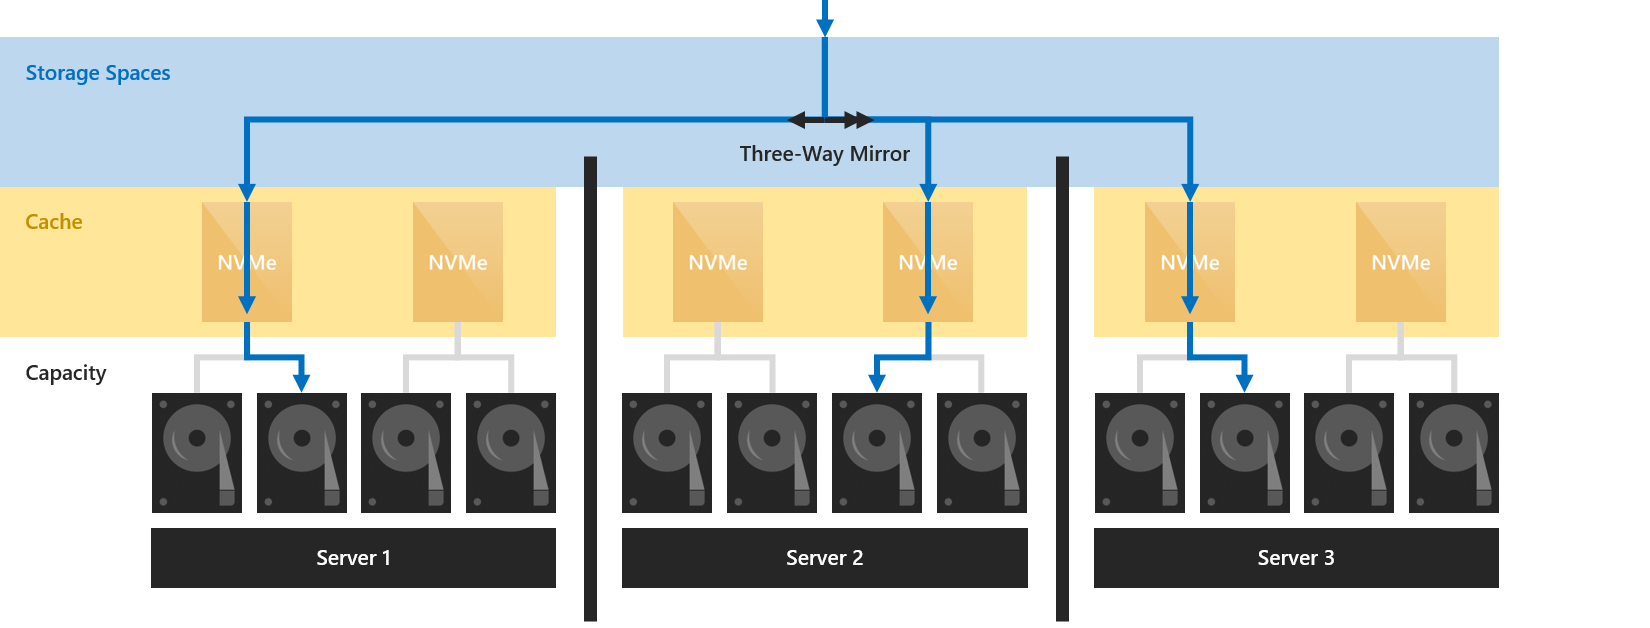 Diagram showing the cache server-side architecture.